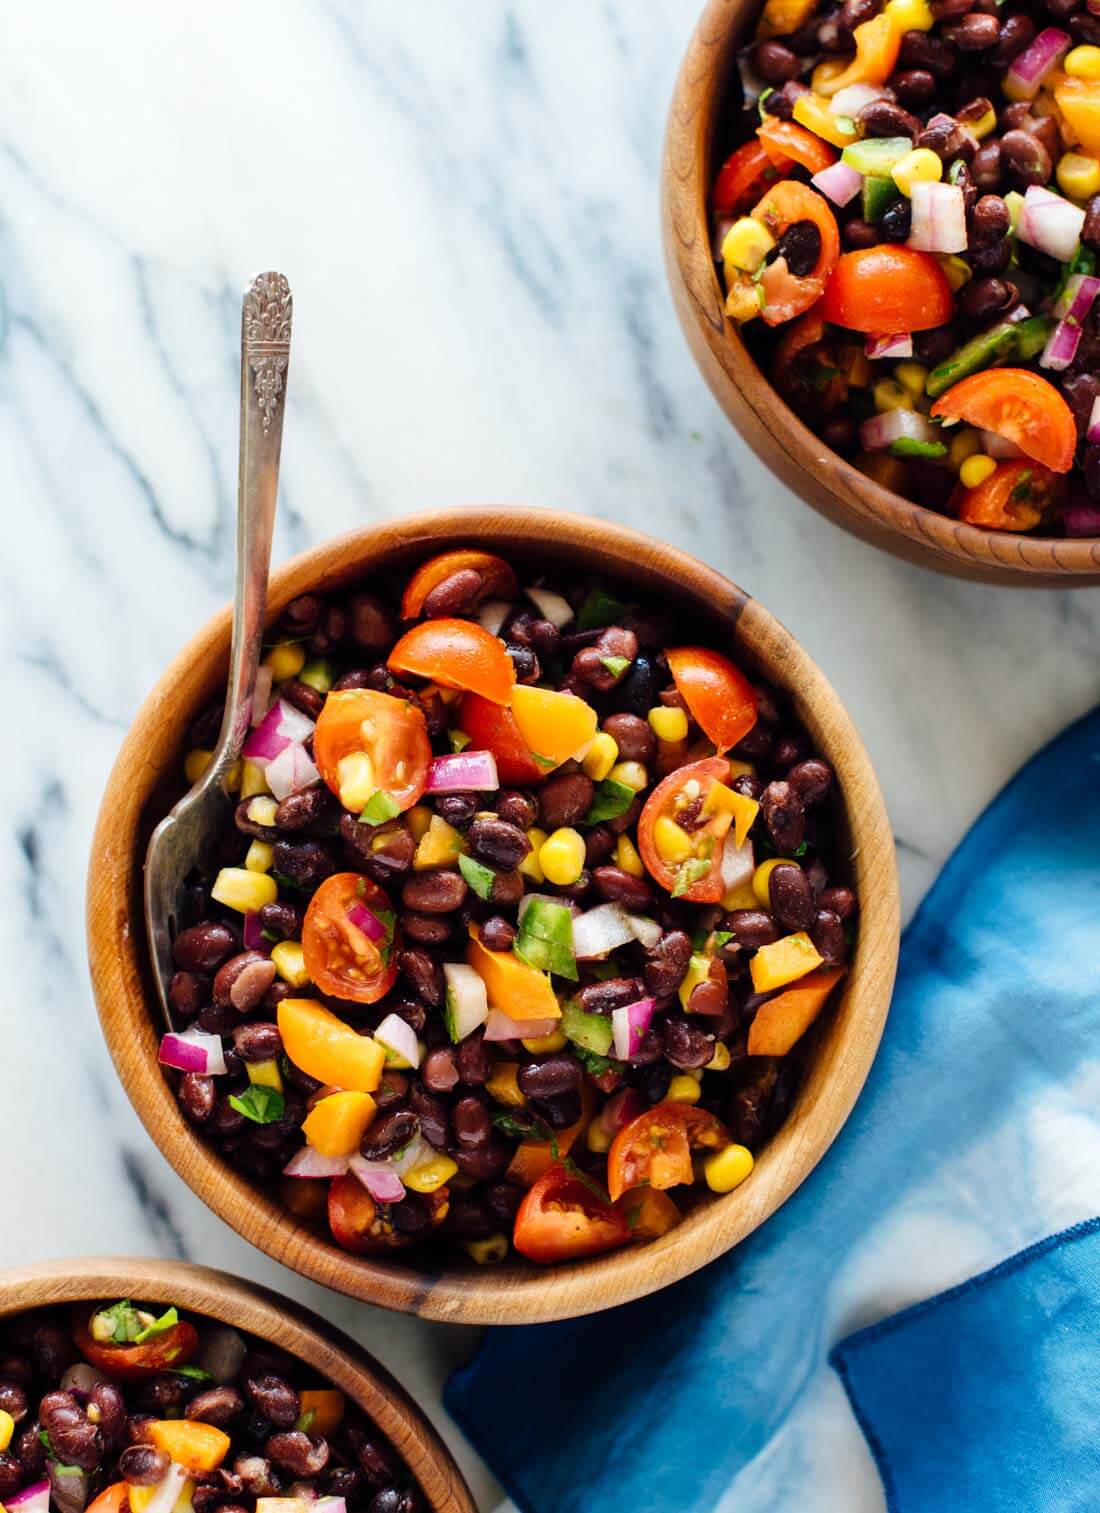 This fresh black bean salad recipe is perfect for lunch!  It's also perfect for parties and potlucks.  Get the recipe at cookieandkate.com